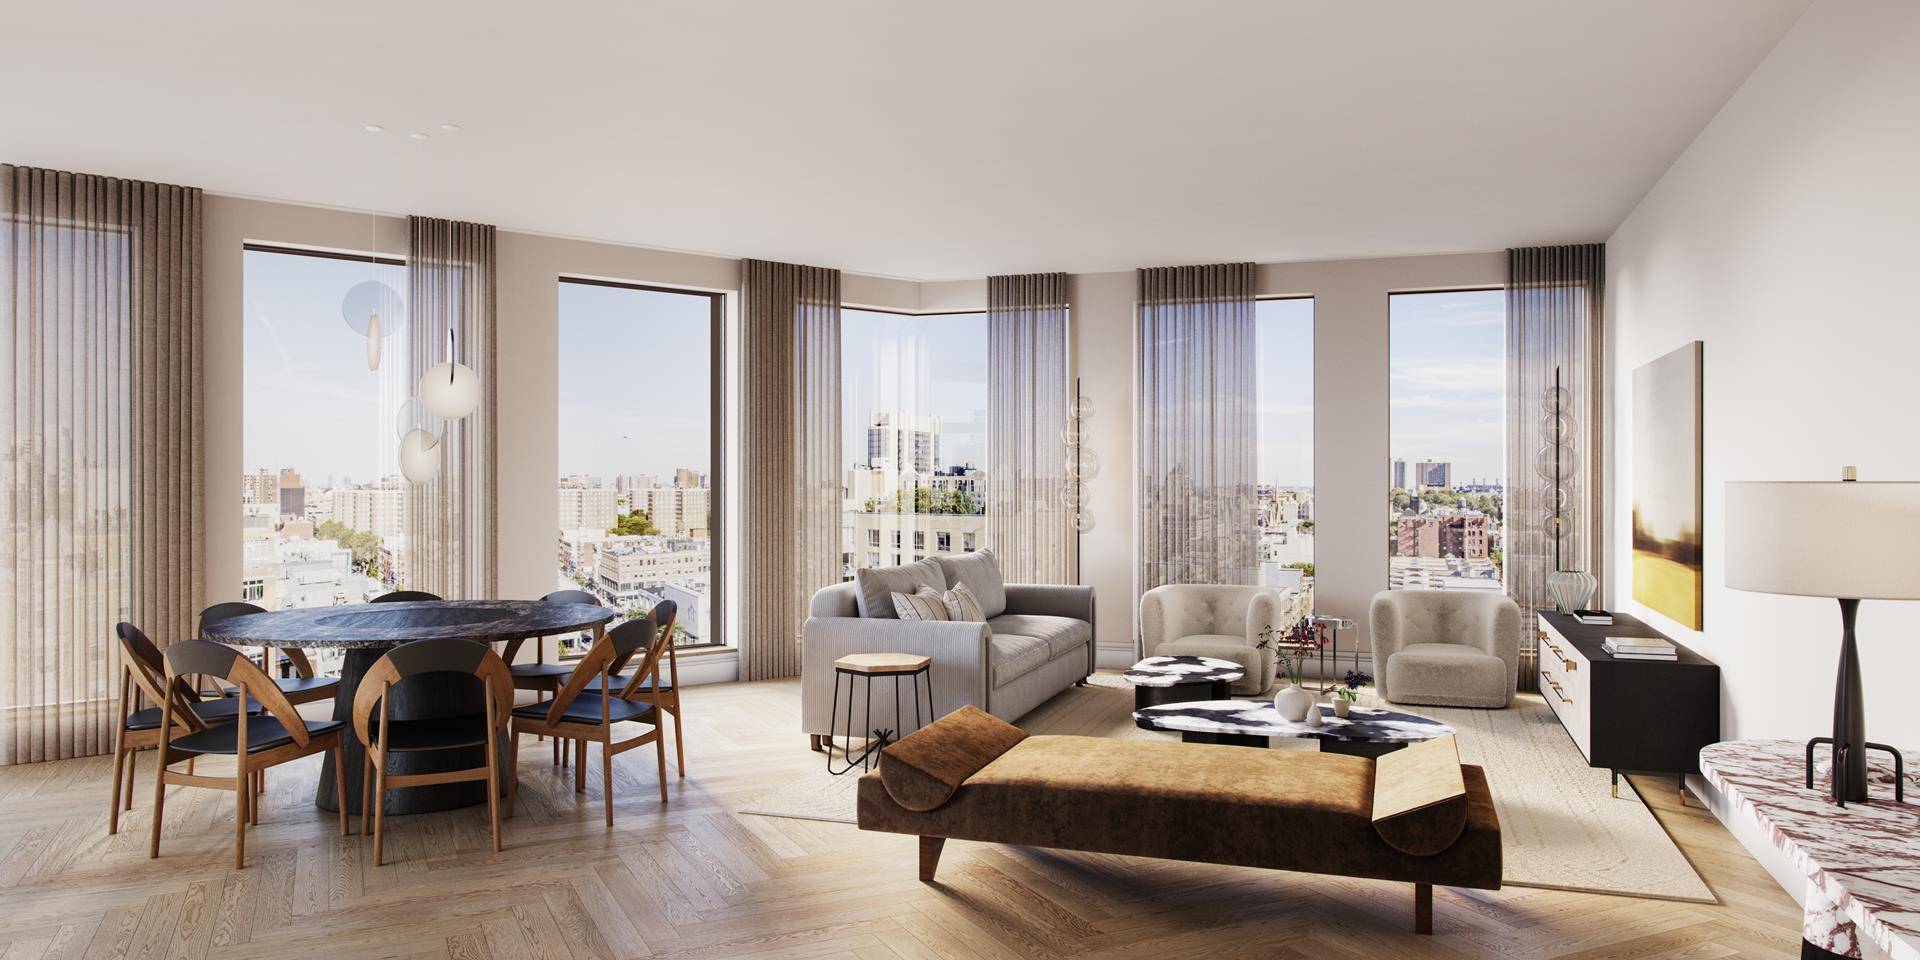 Sales Gallery Now Open By Appointment Introducing the immaculate residence 10P at 300 West, a 1, 300 square foot northwestern facing three bedroom, two and a half bathroom, offering extensive ...